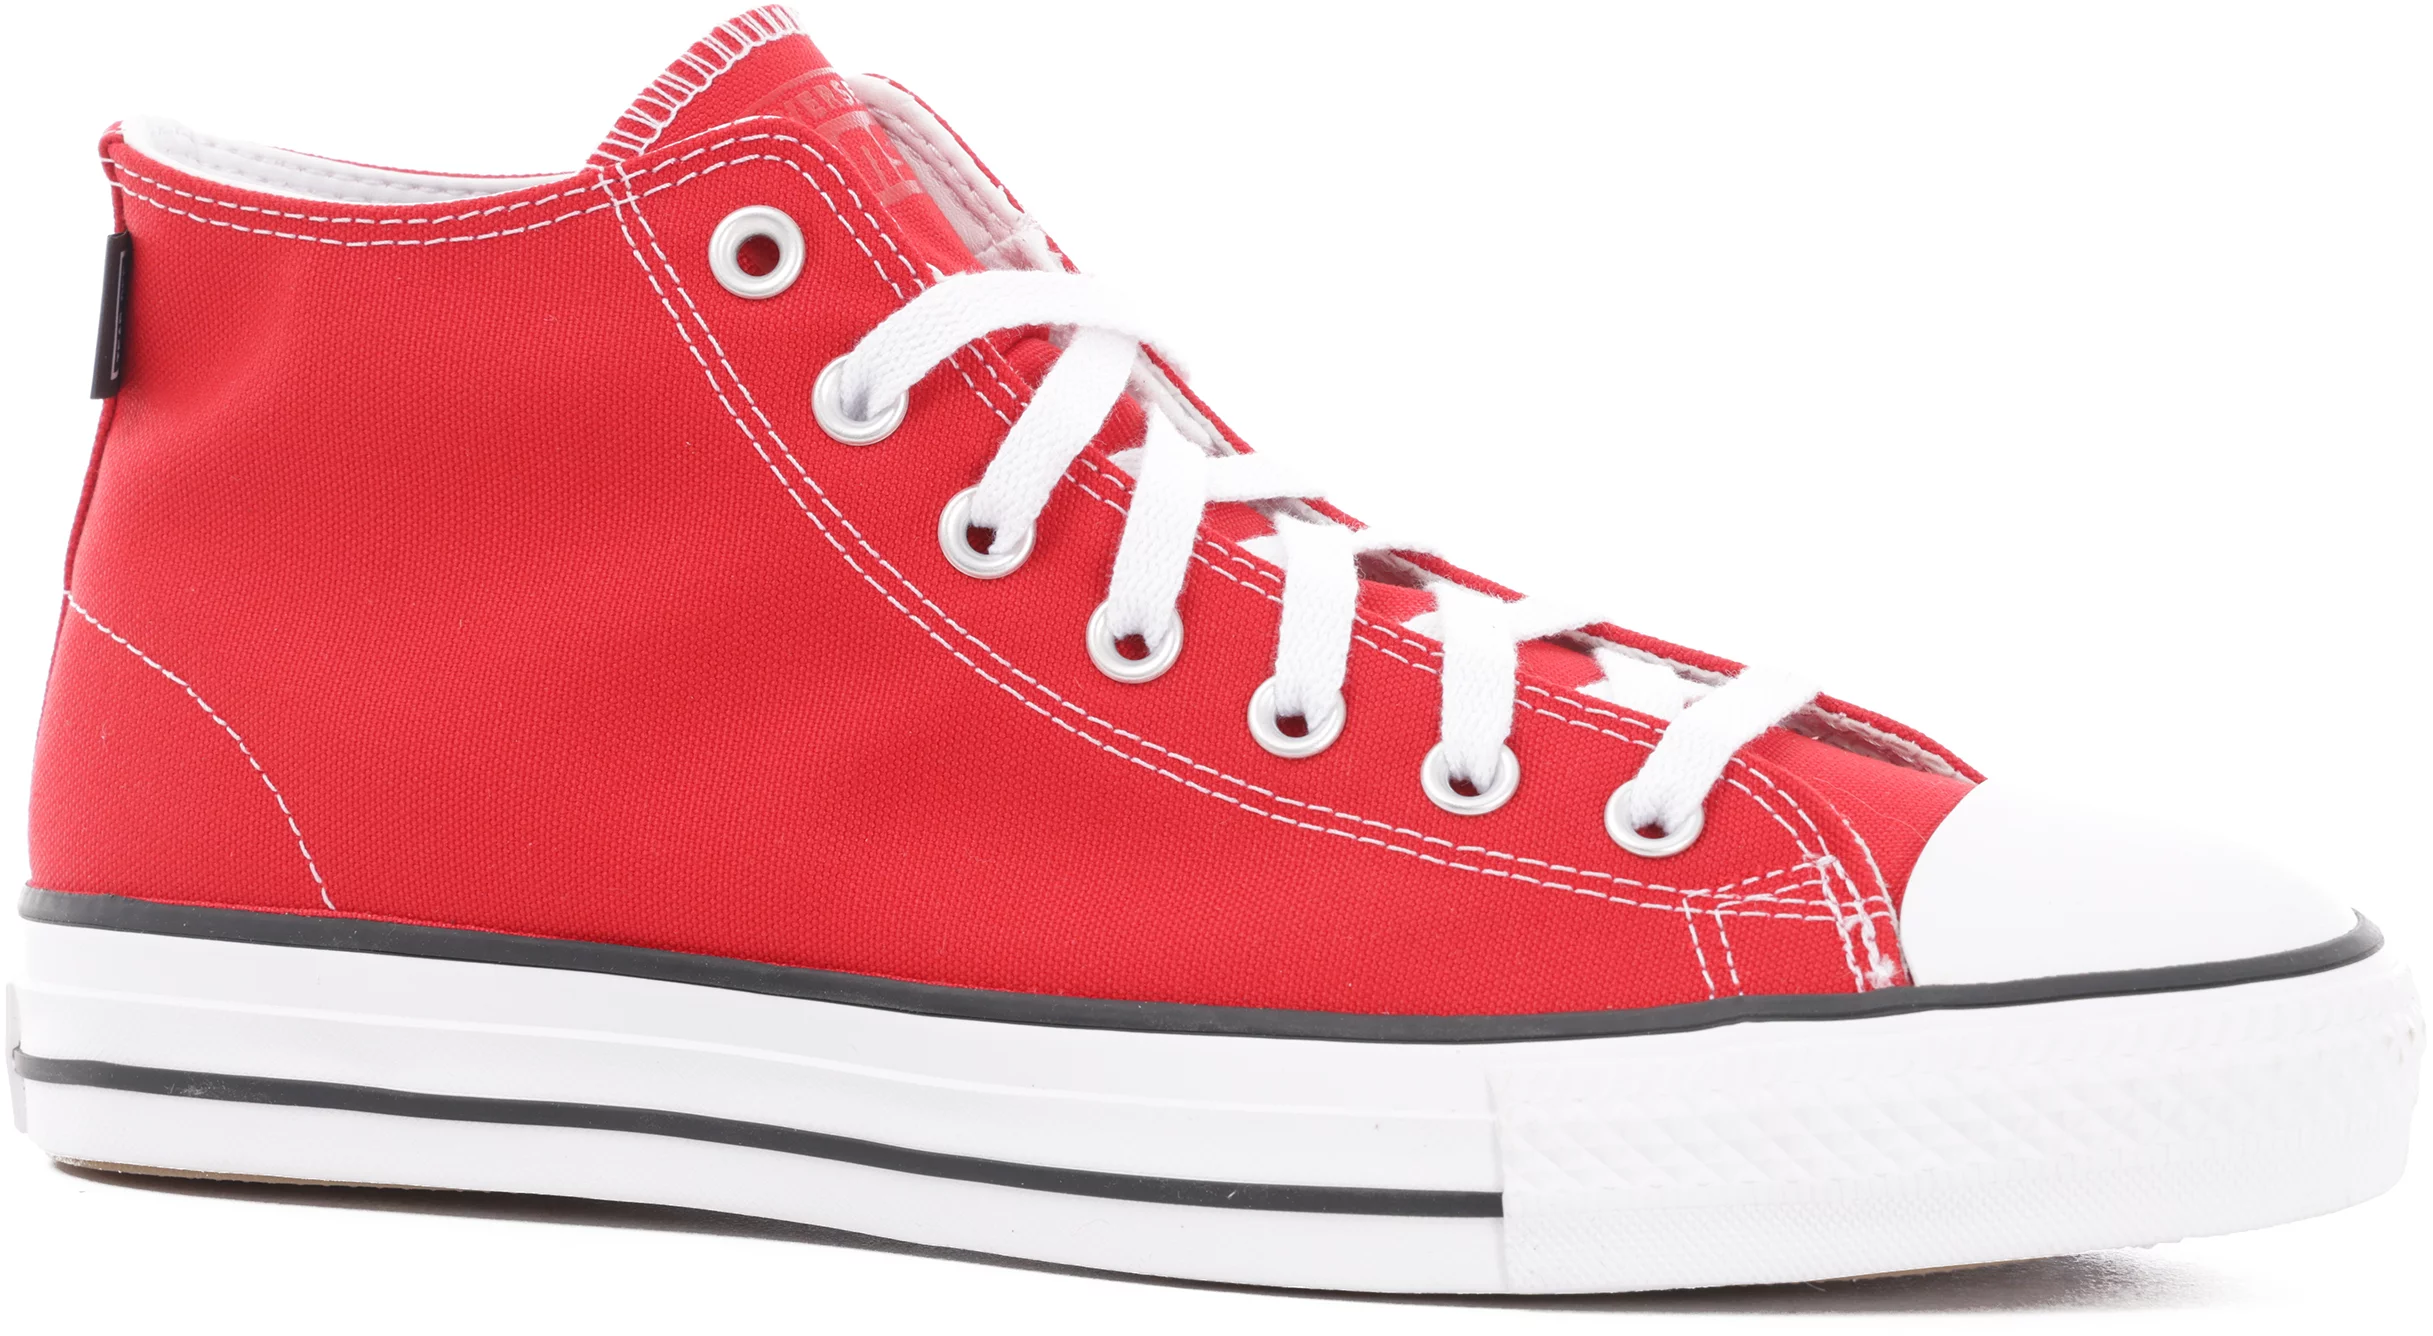 overraskende Profit Soaked Converse Chuck Taylor All Star Pro Mid Skate Shoes - university red/white/black  | Tactics